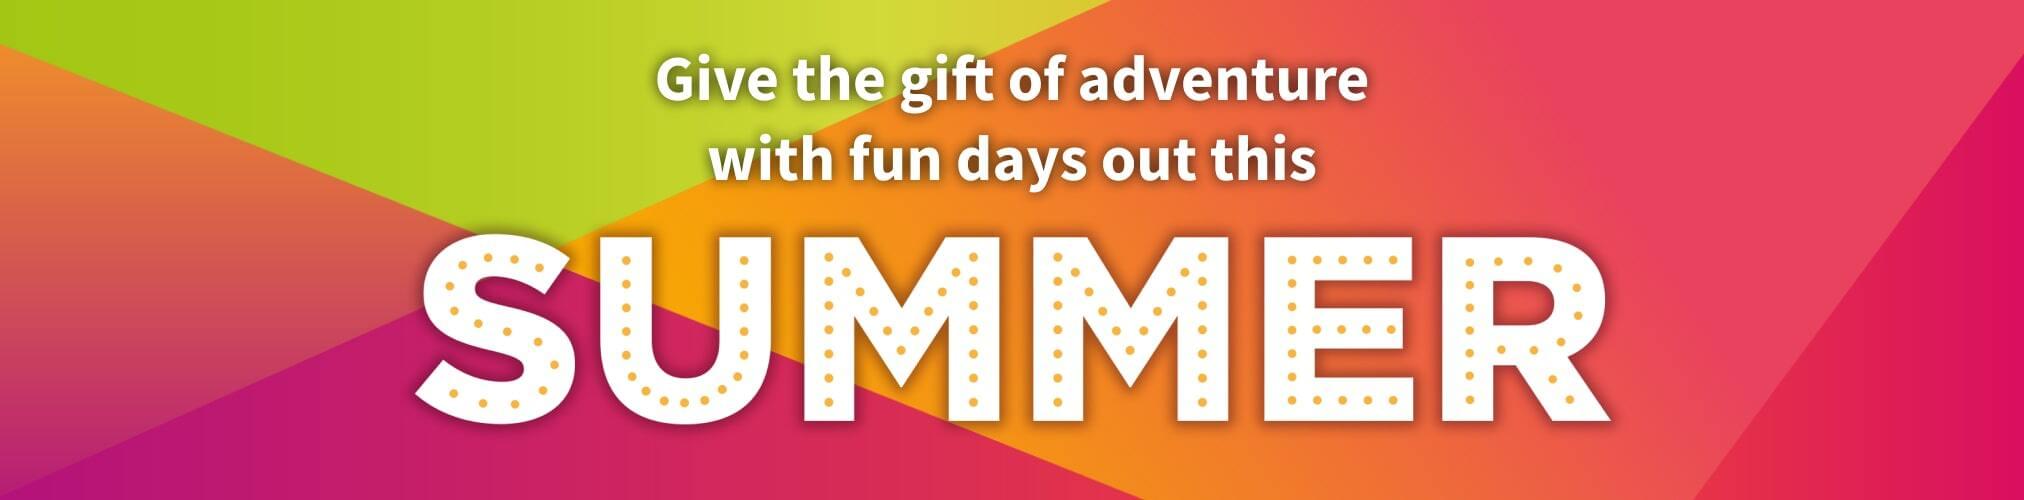 Give the gift of adventure with fun days out this Summer